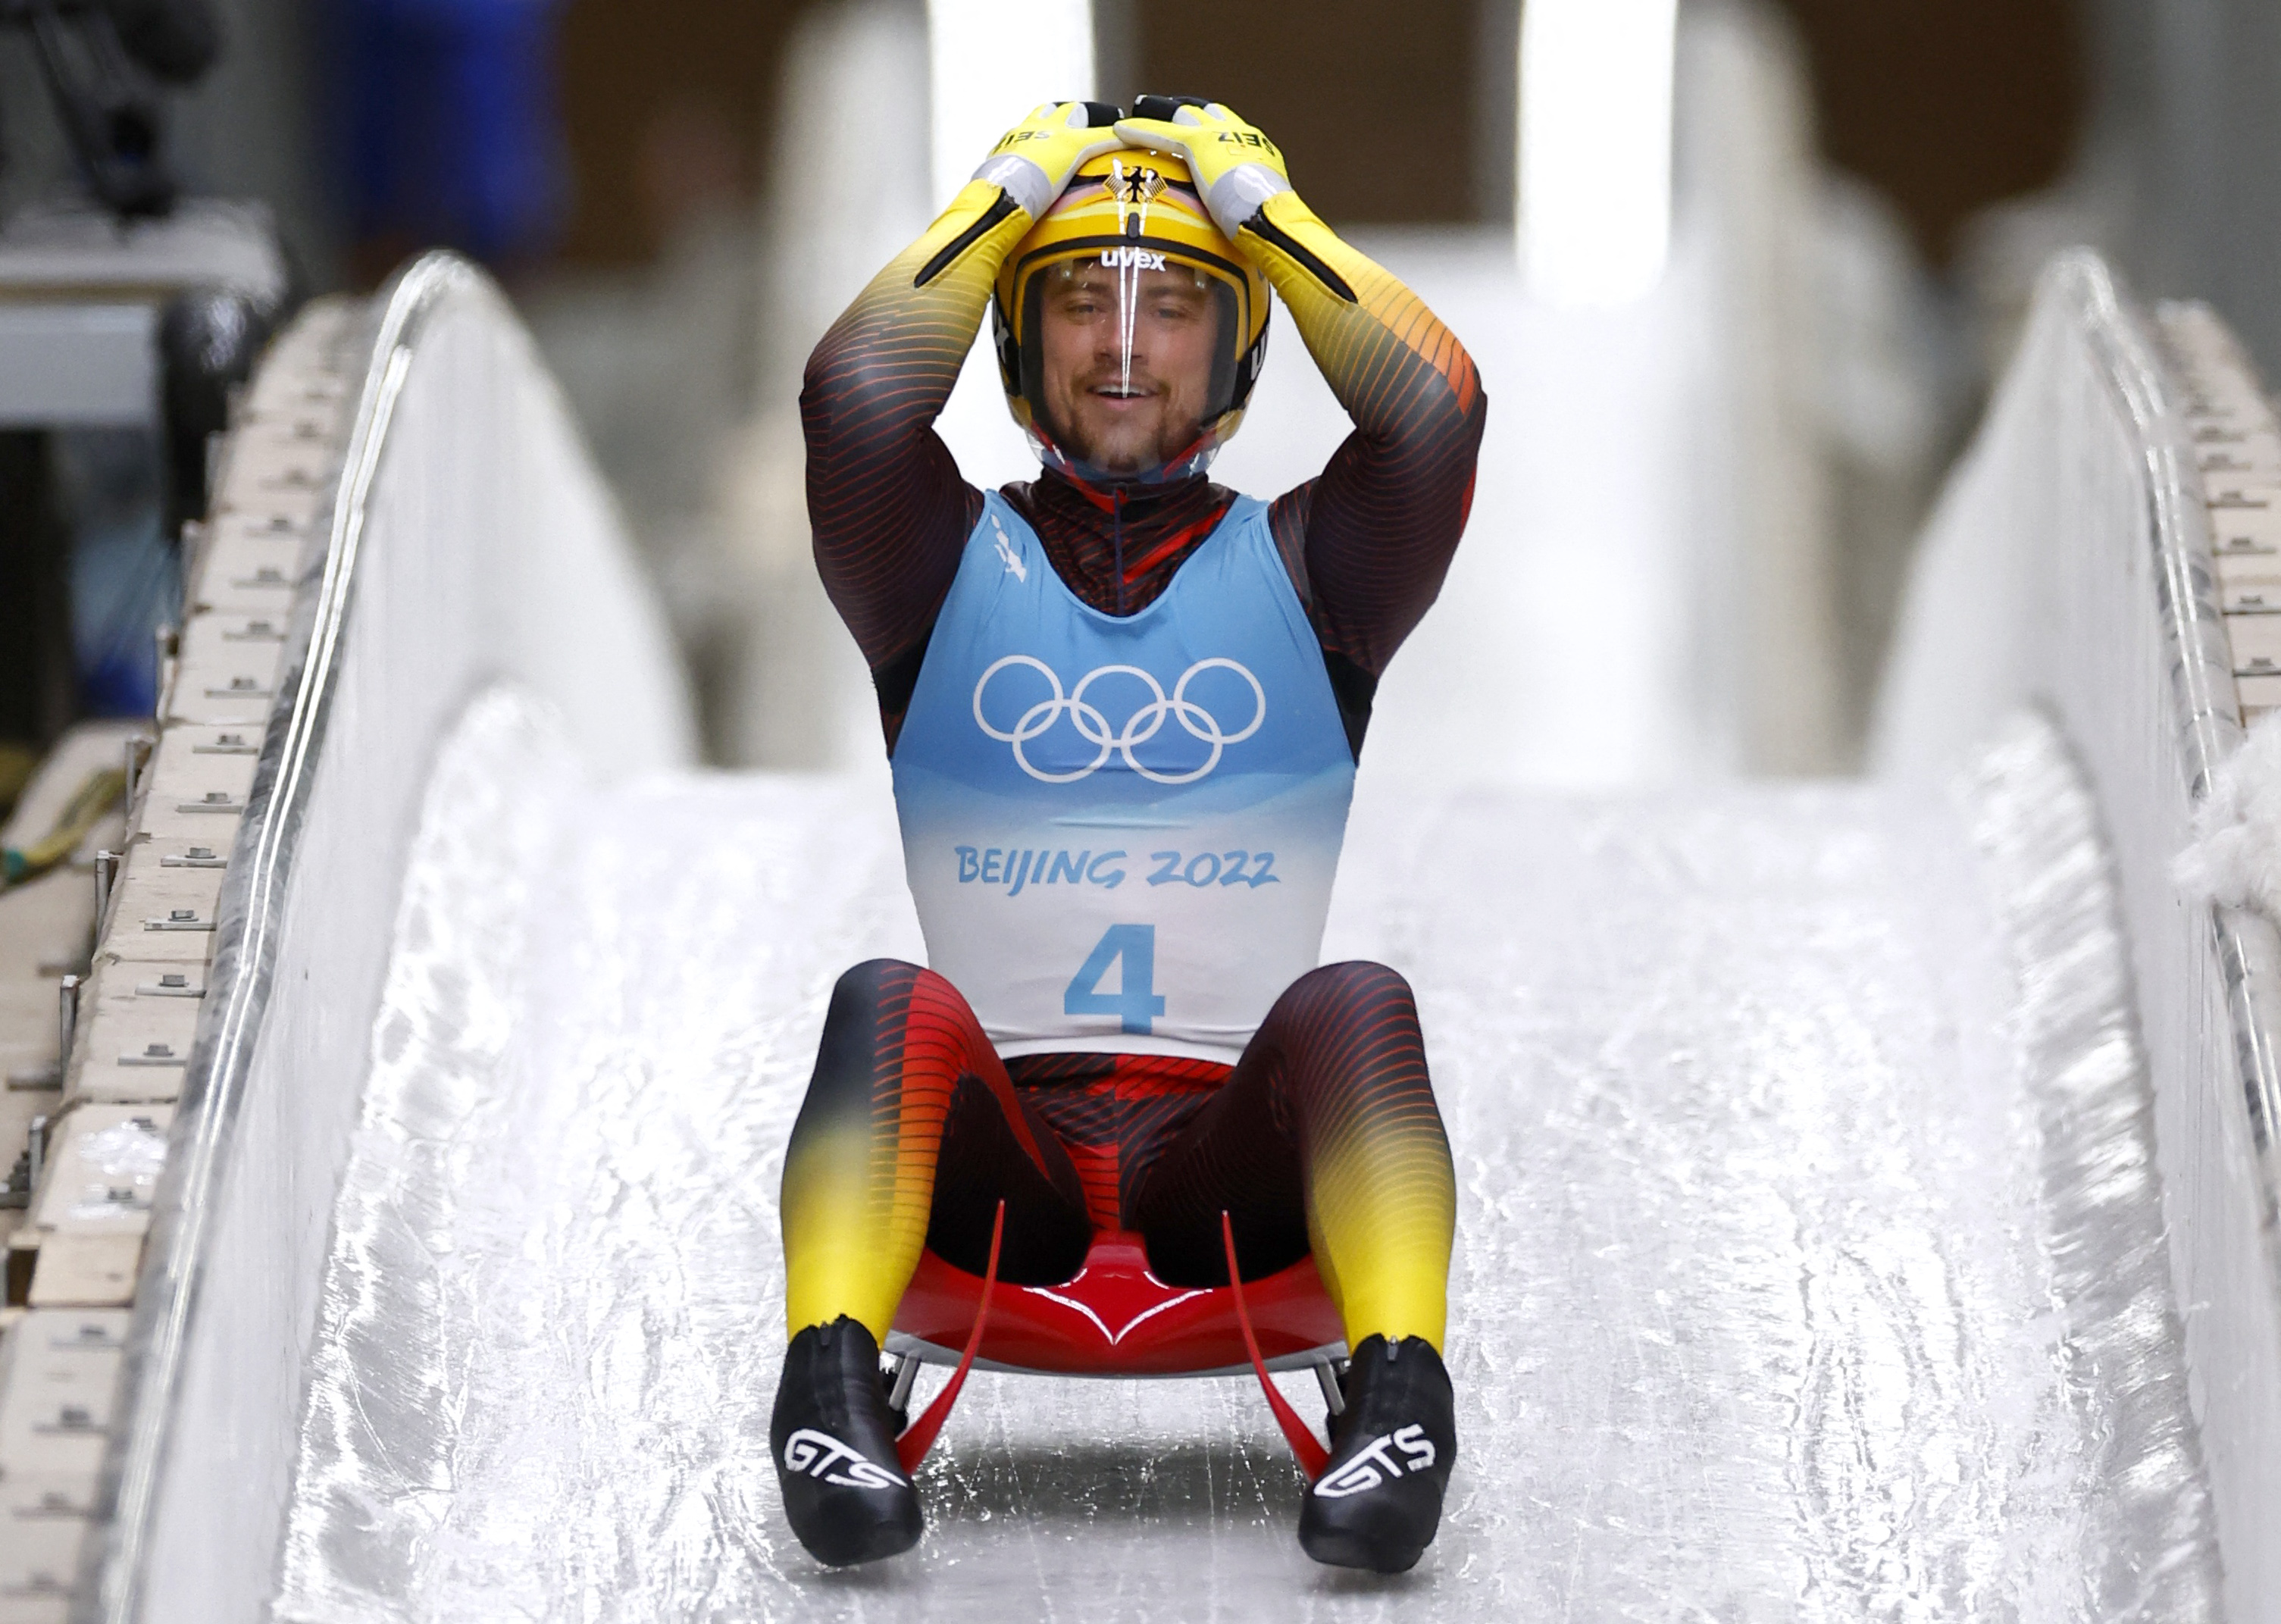 2022 Beijing Olympics - Luge - Men's Singles Run 4 - National Sliding Centre, Beijing, China - February 6, 2022. Johannes Ludwig of Germany reacts after winning gold. REUTERS/Thomas Peter